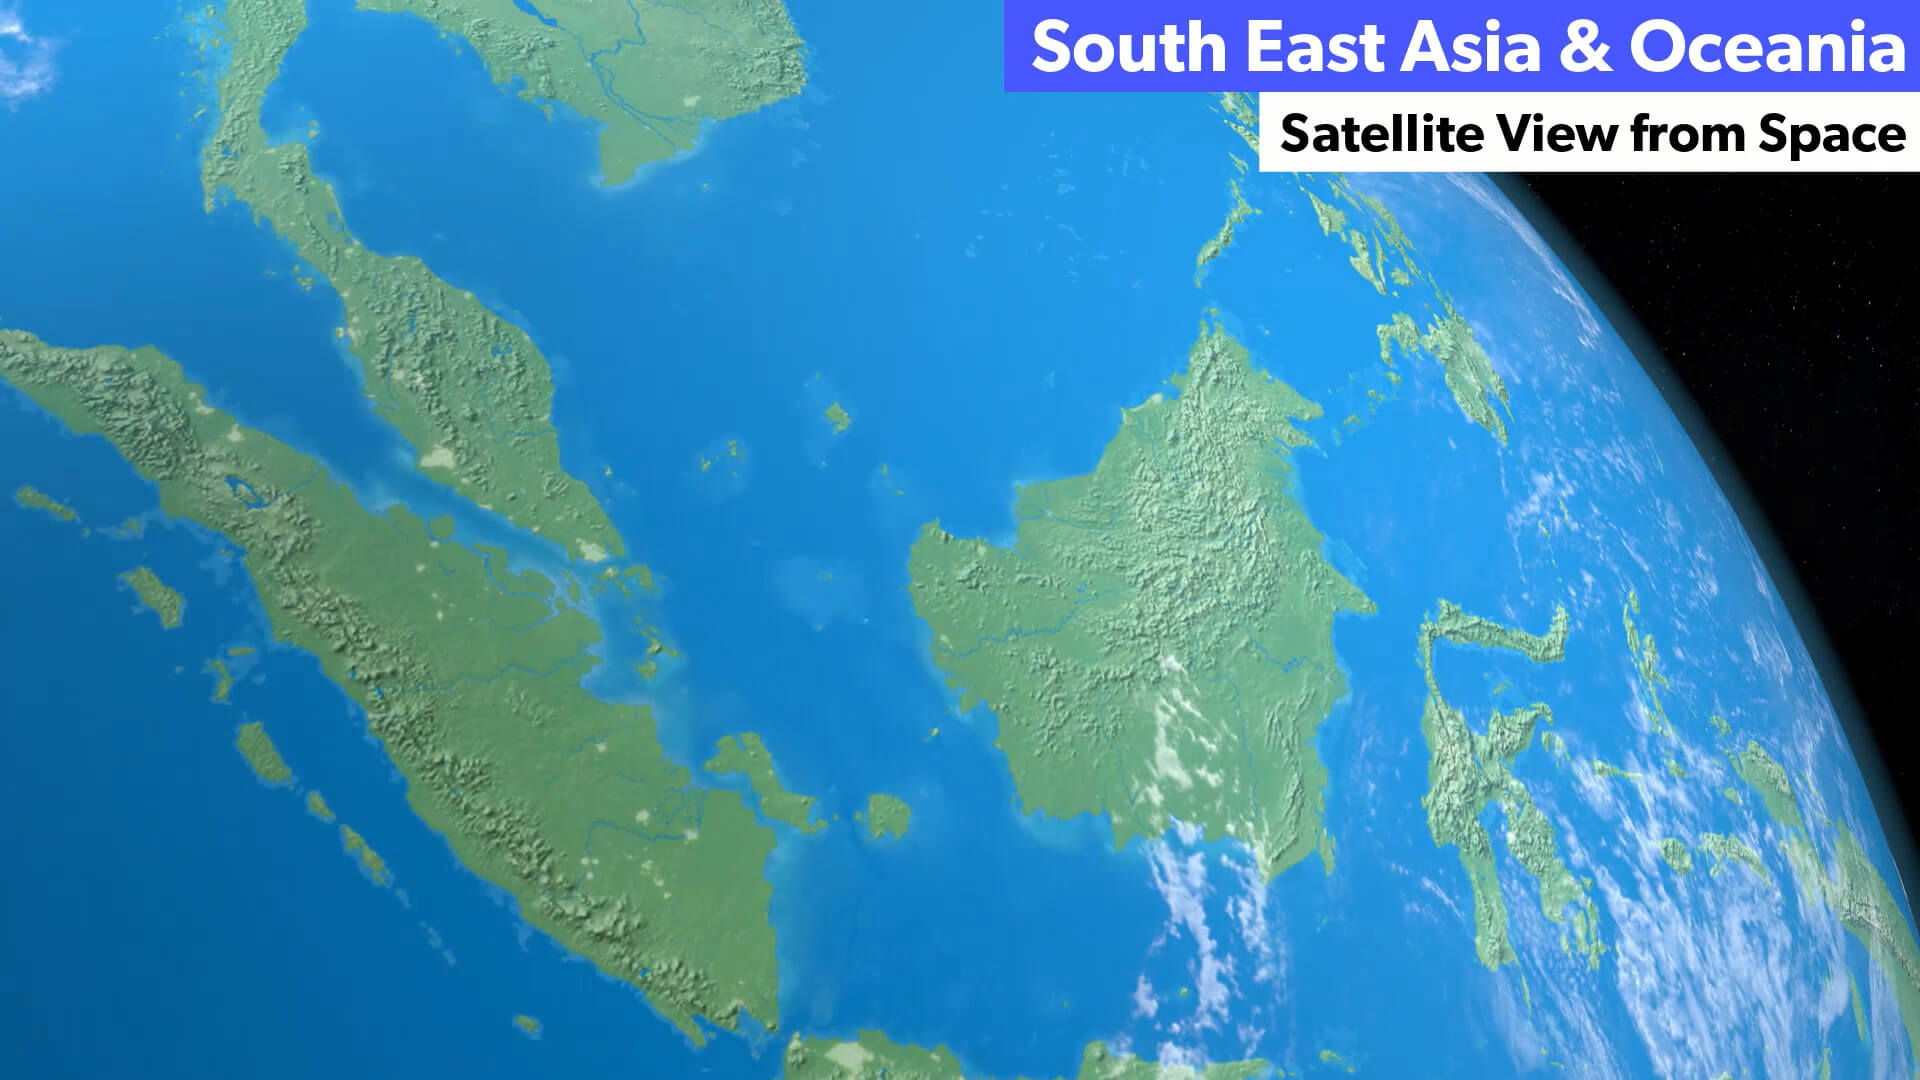 South East Asia and Oceania from Space